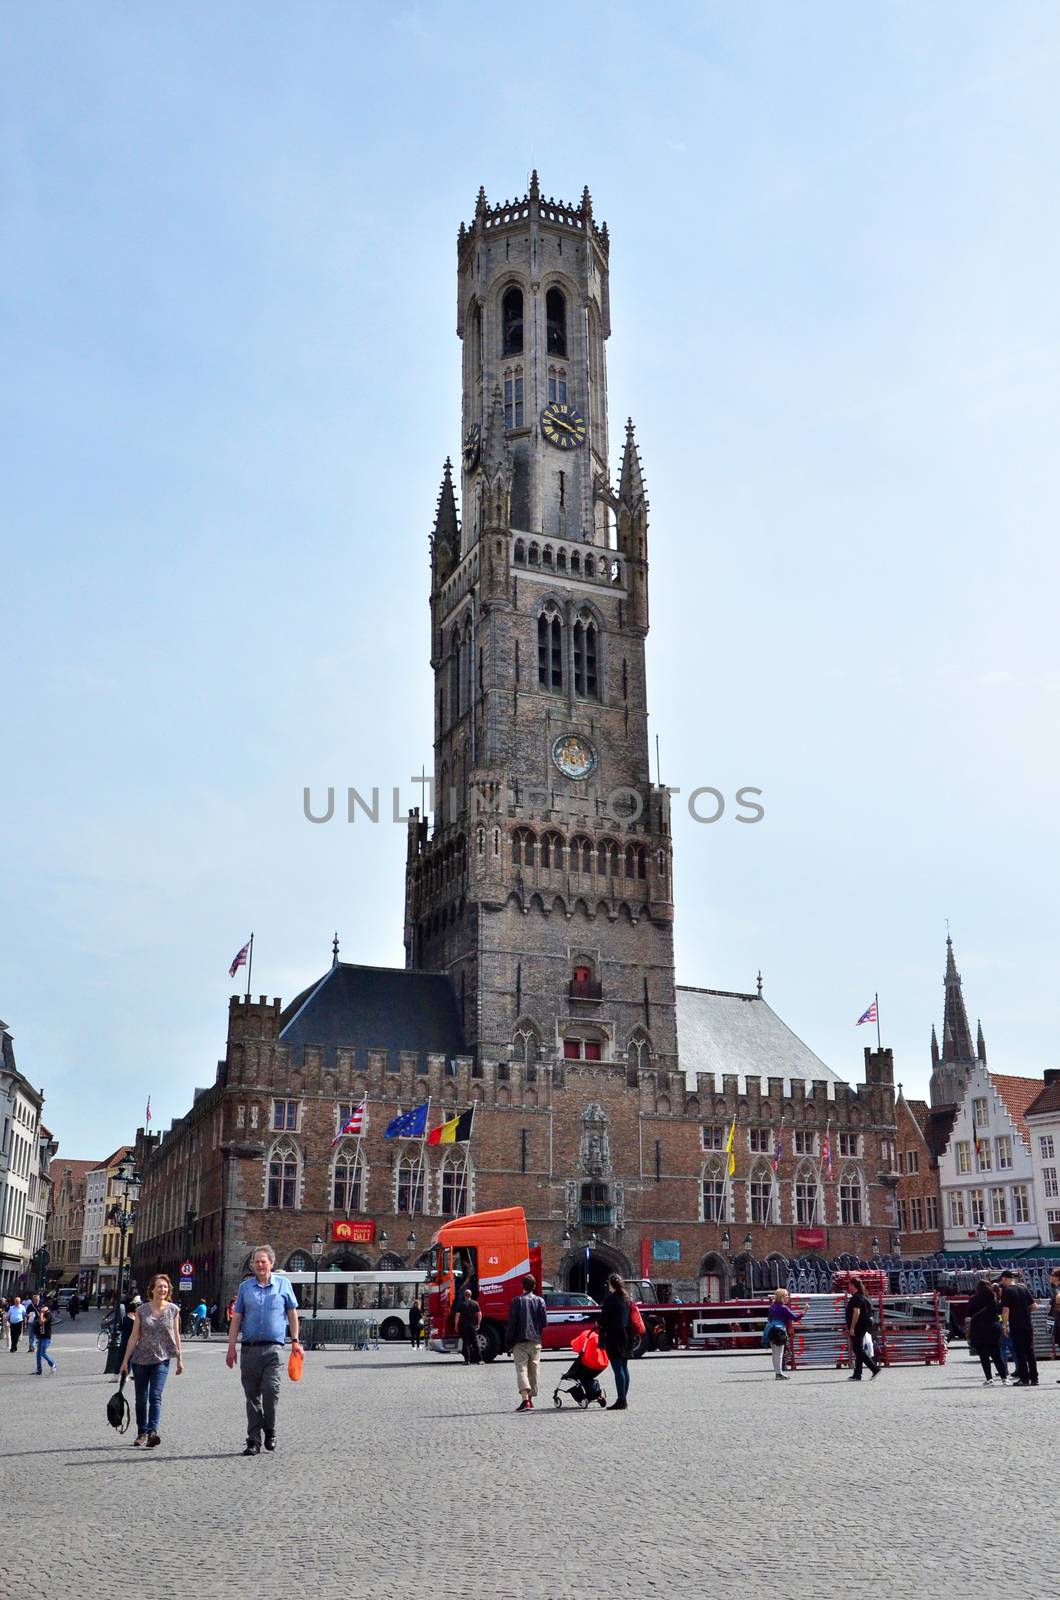 Bruges, Belgium - May 11, 2015: Tourist visit Belfry of Bruges by siraanamwong